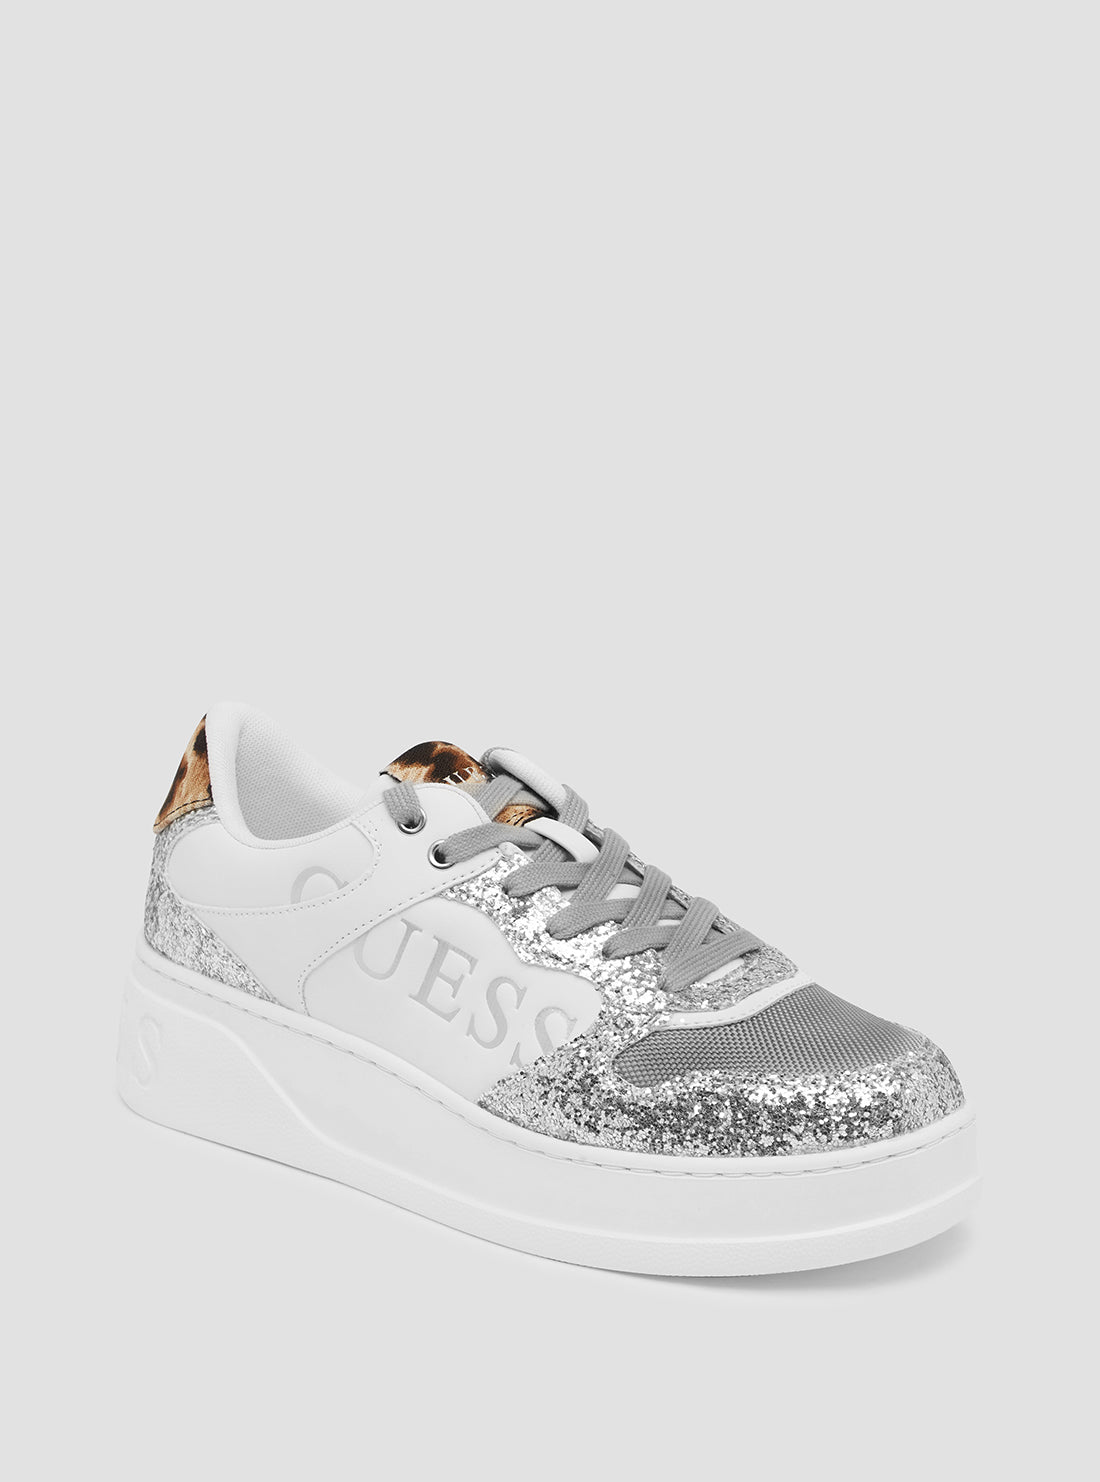 GUESS Women's White Silver Leopard Cleva Low Top Sneakers CLEVA Front View